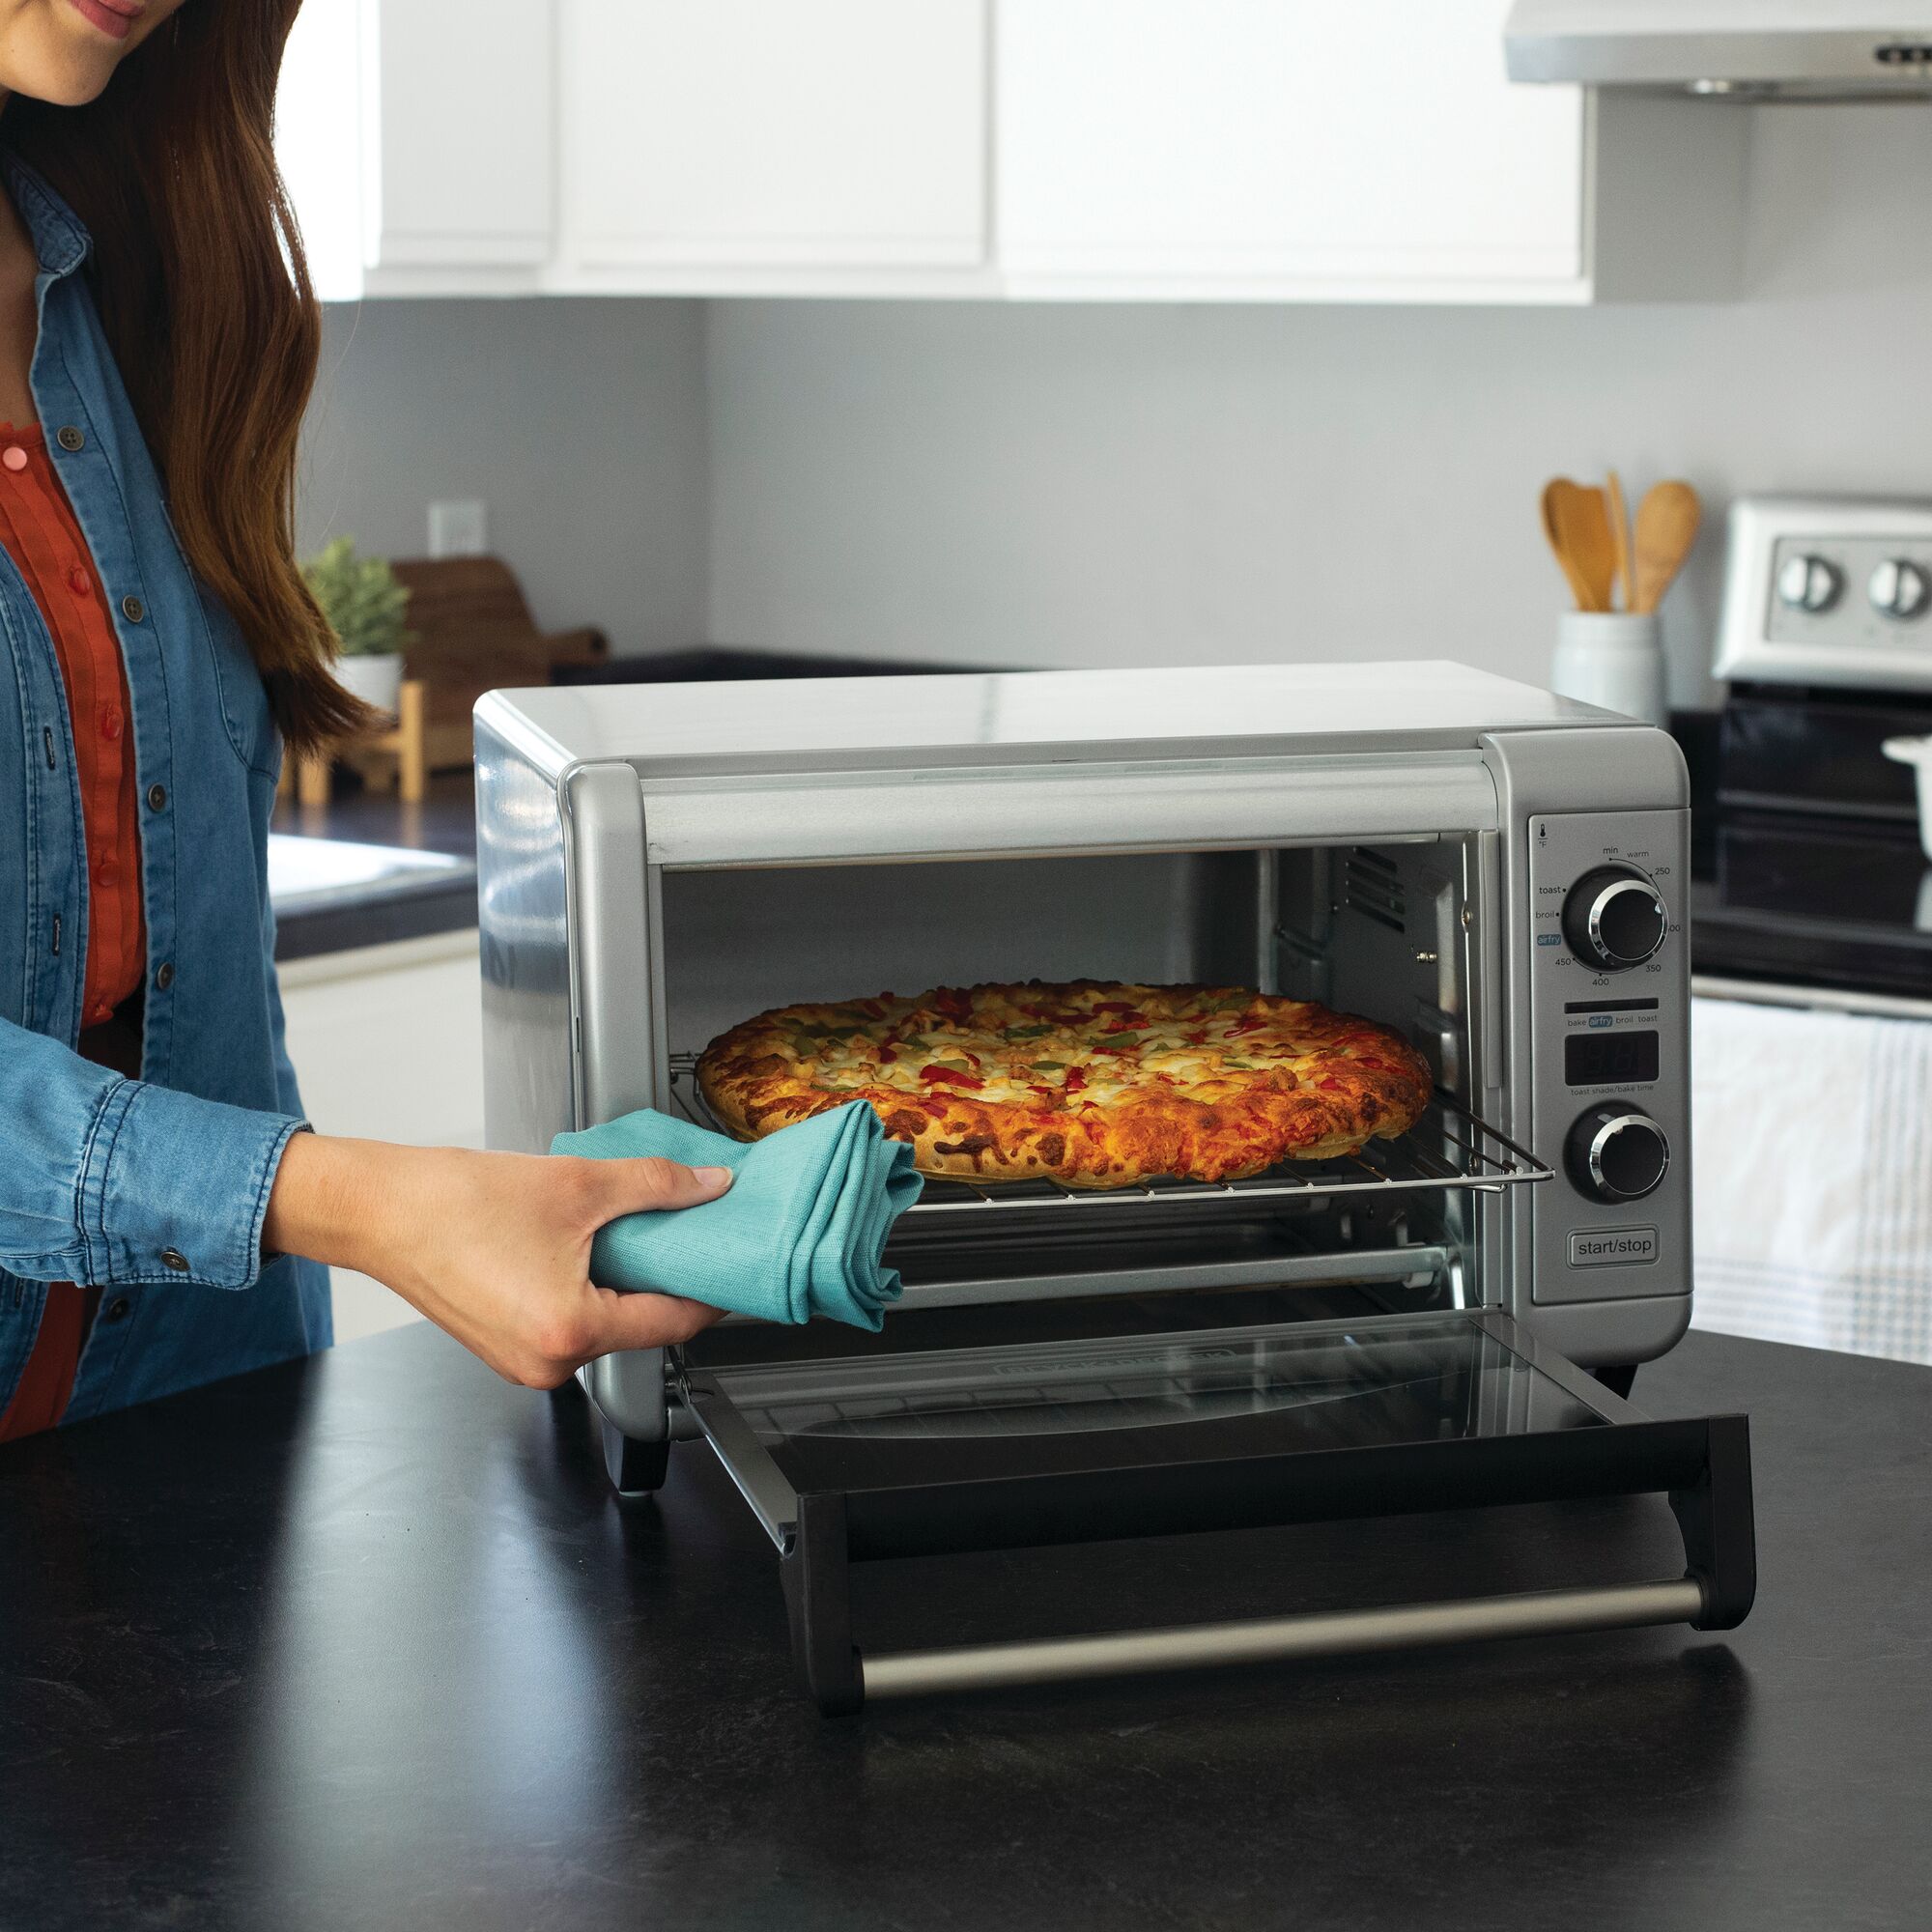 Crisp \u2018N Bake air fry digital convection countertop oven being used by a person to cook pizza.